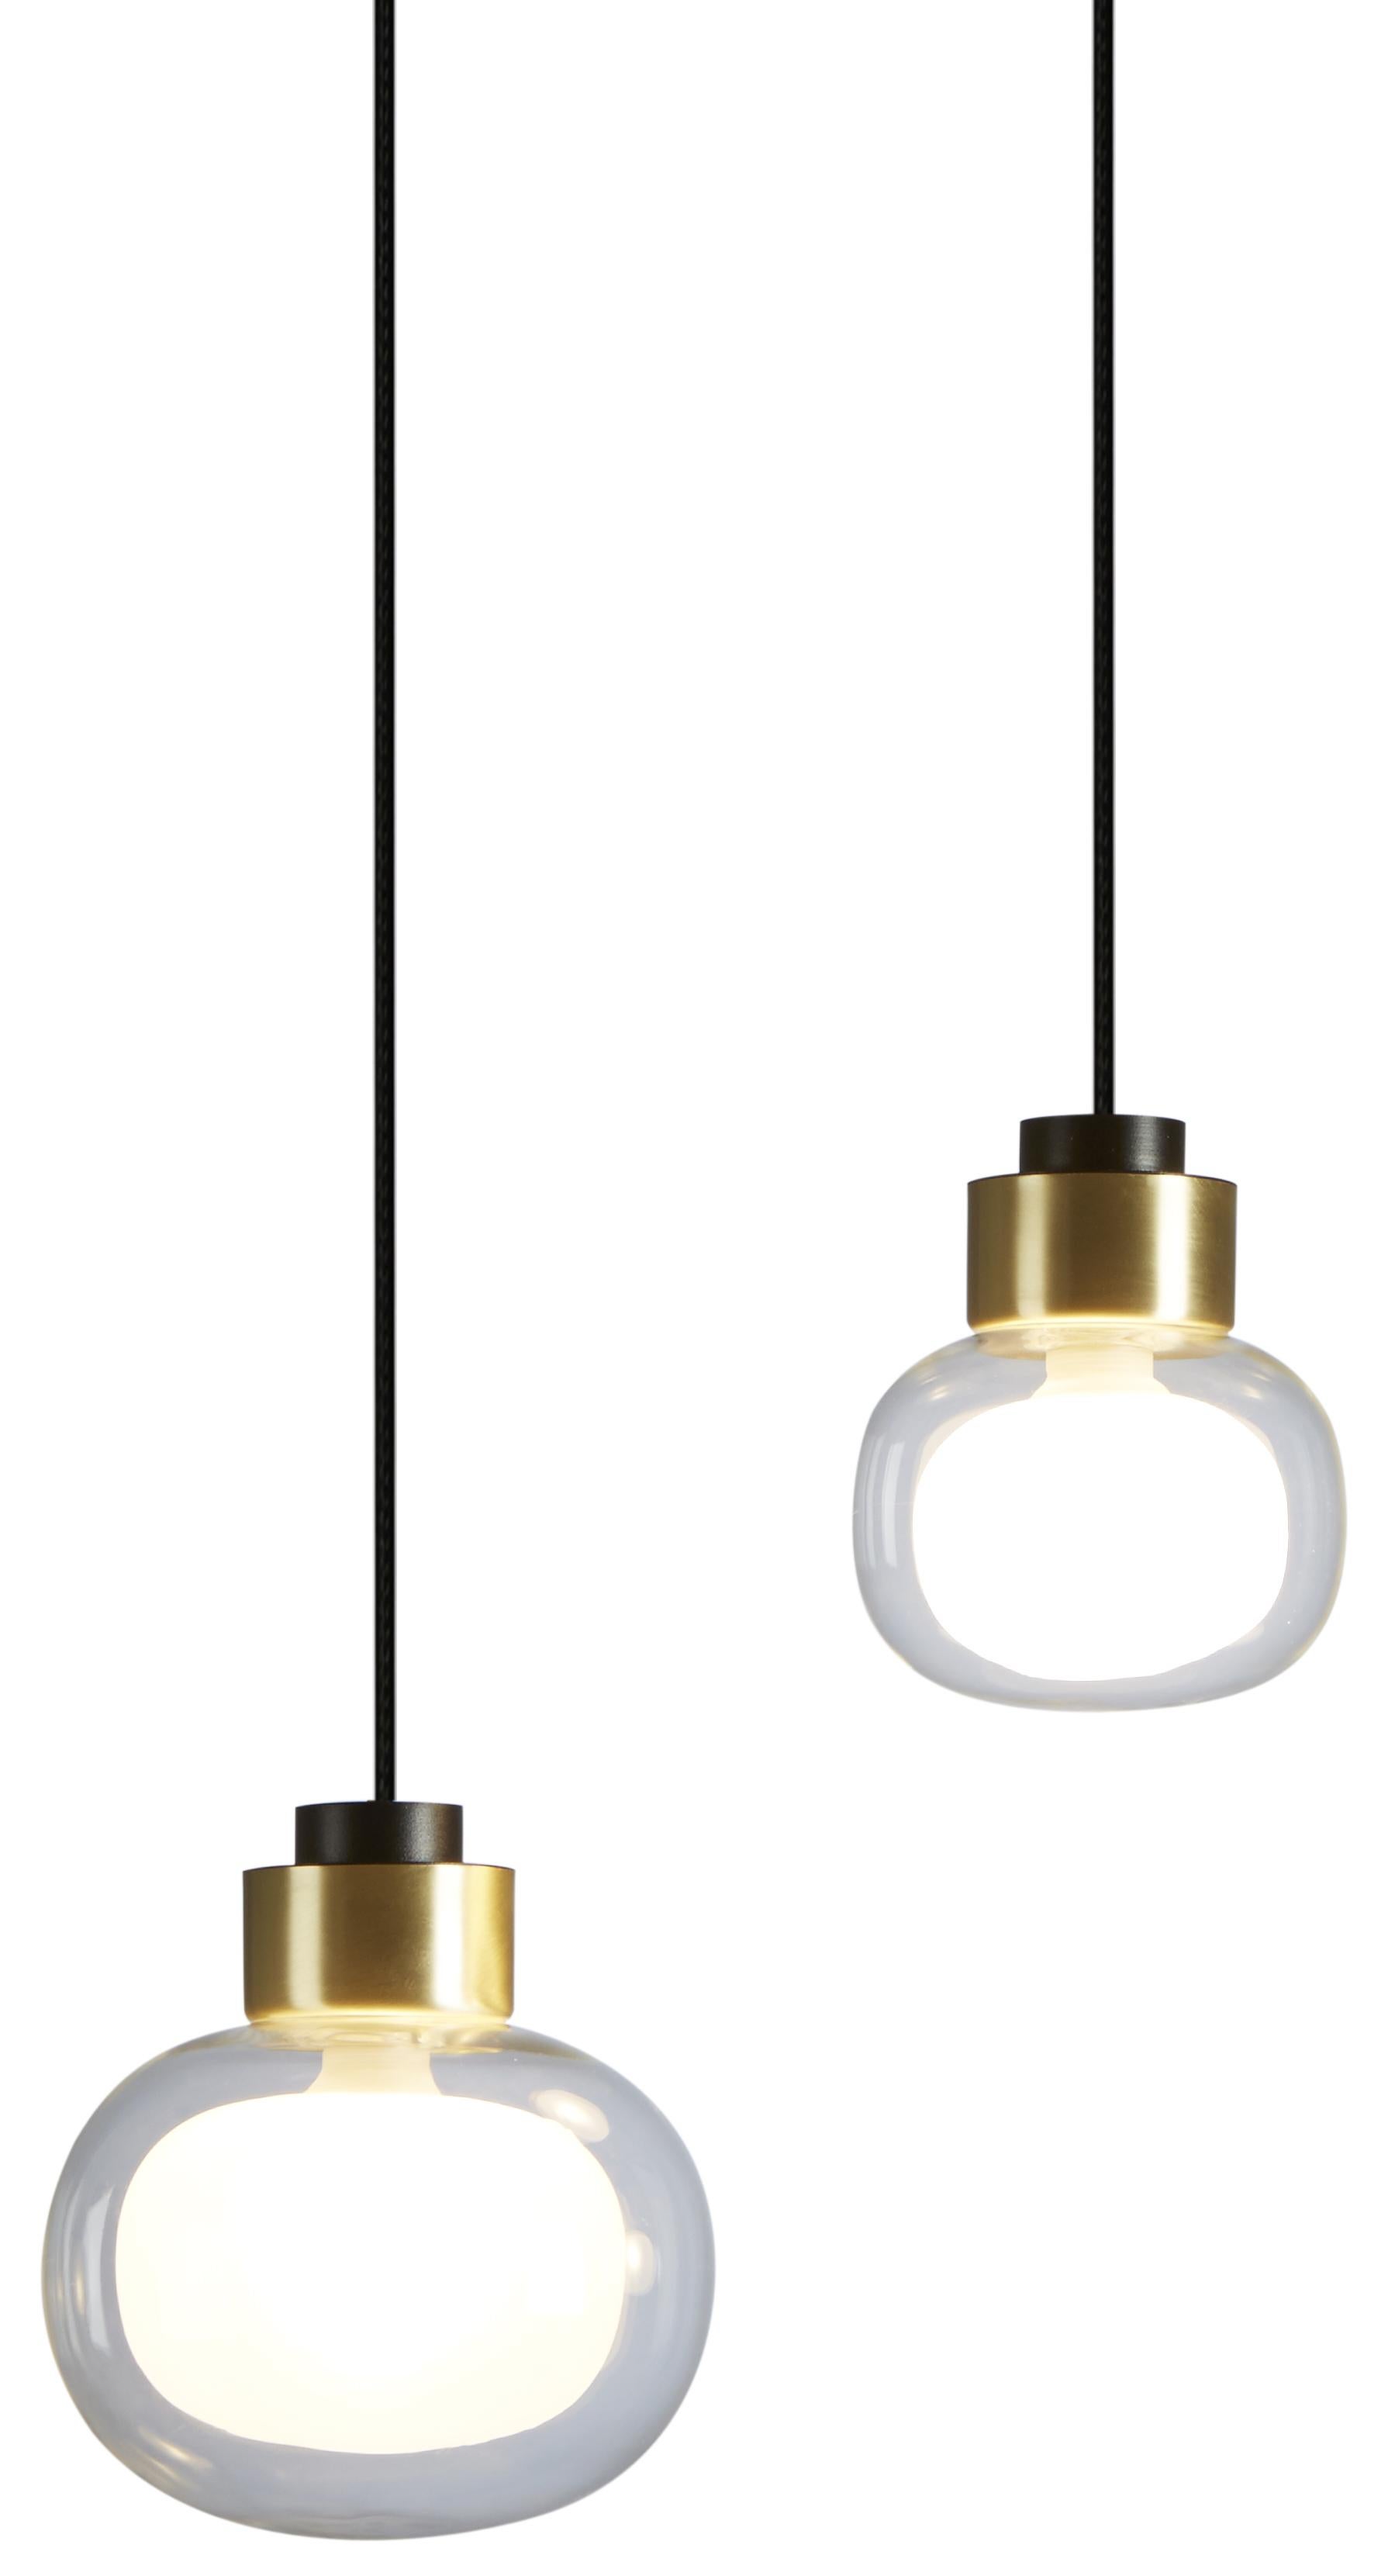 Set of 3 Pendant Lamps 'Nabila 552.21' by Tooy, Brushed Brass, Clear Glass For Sale 3